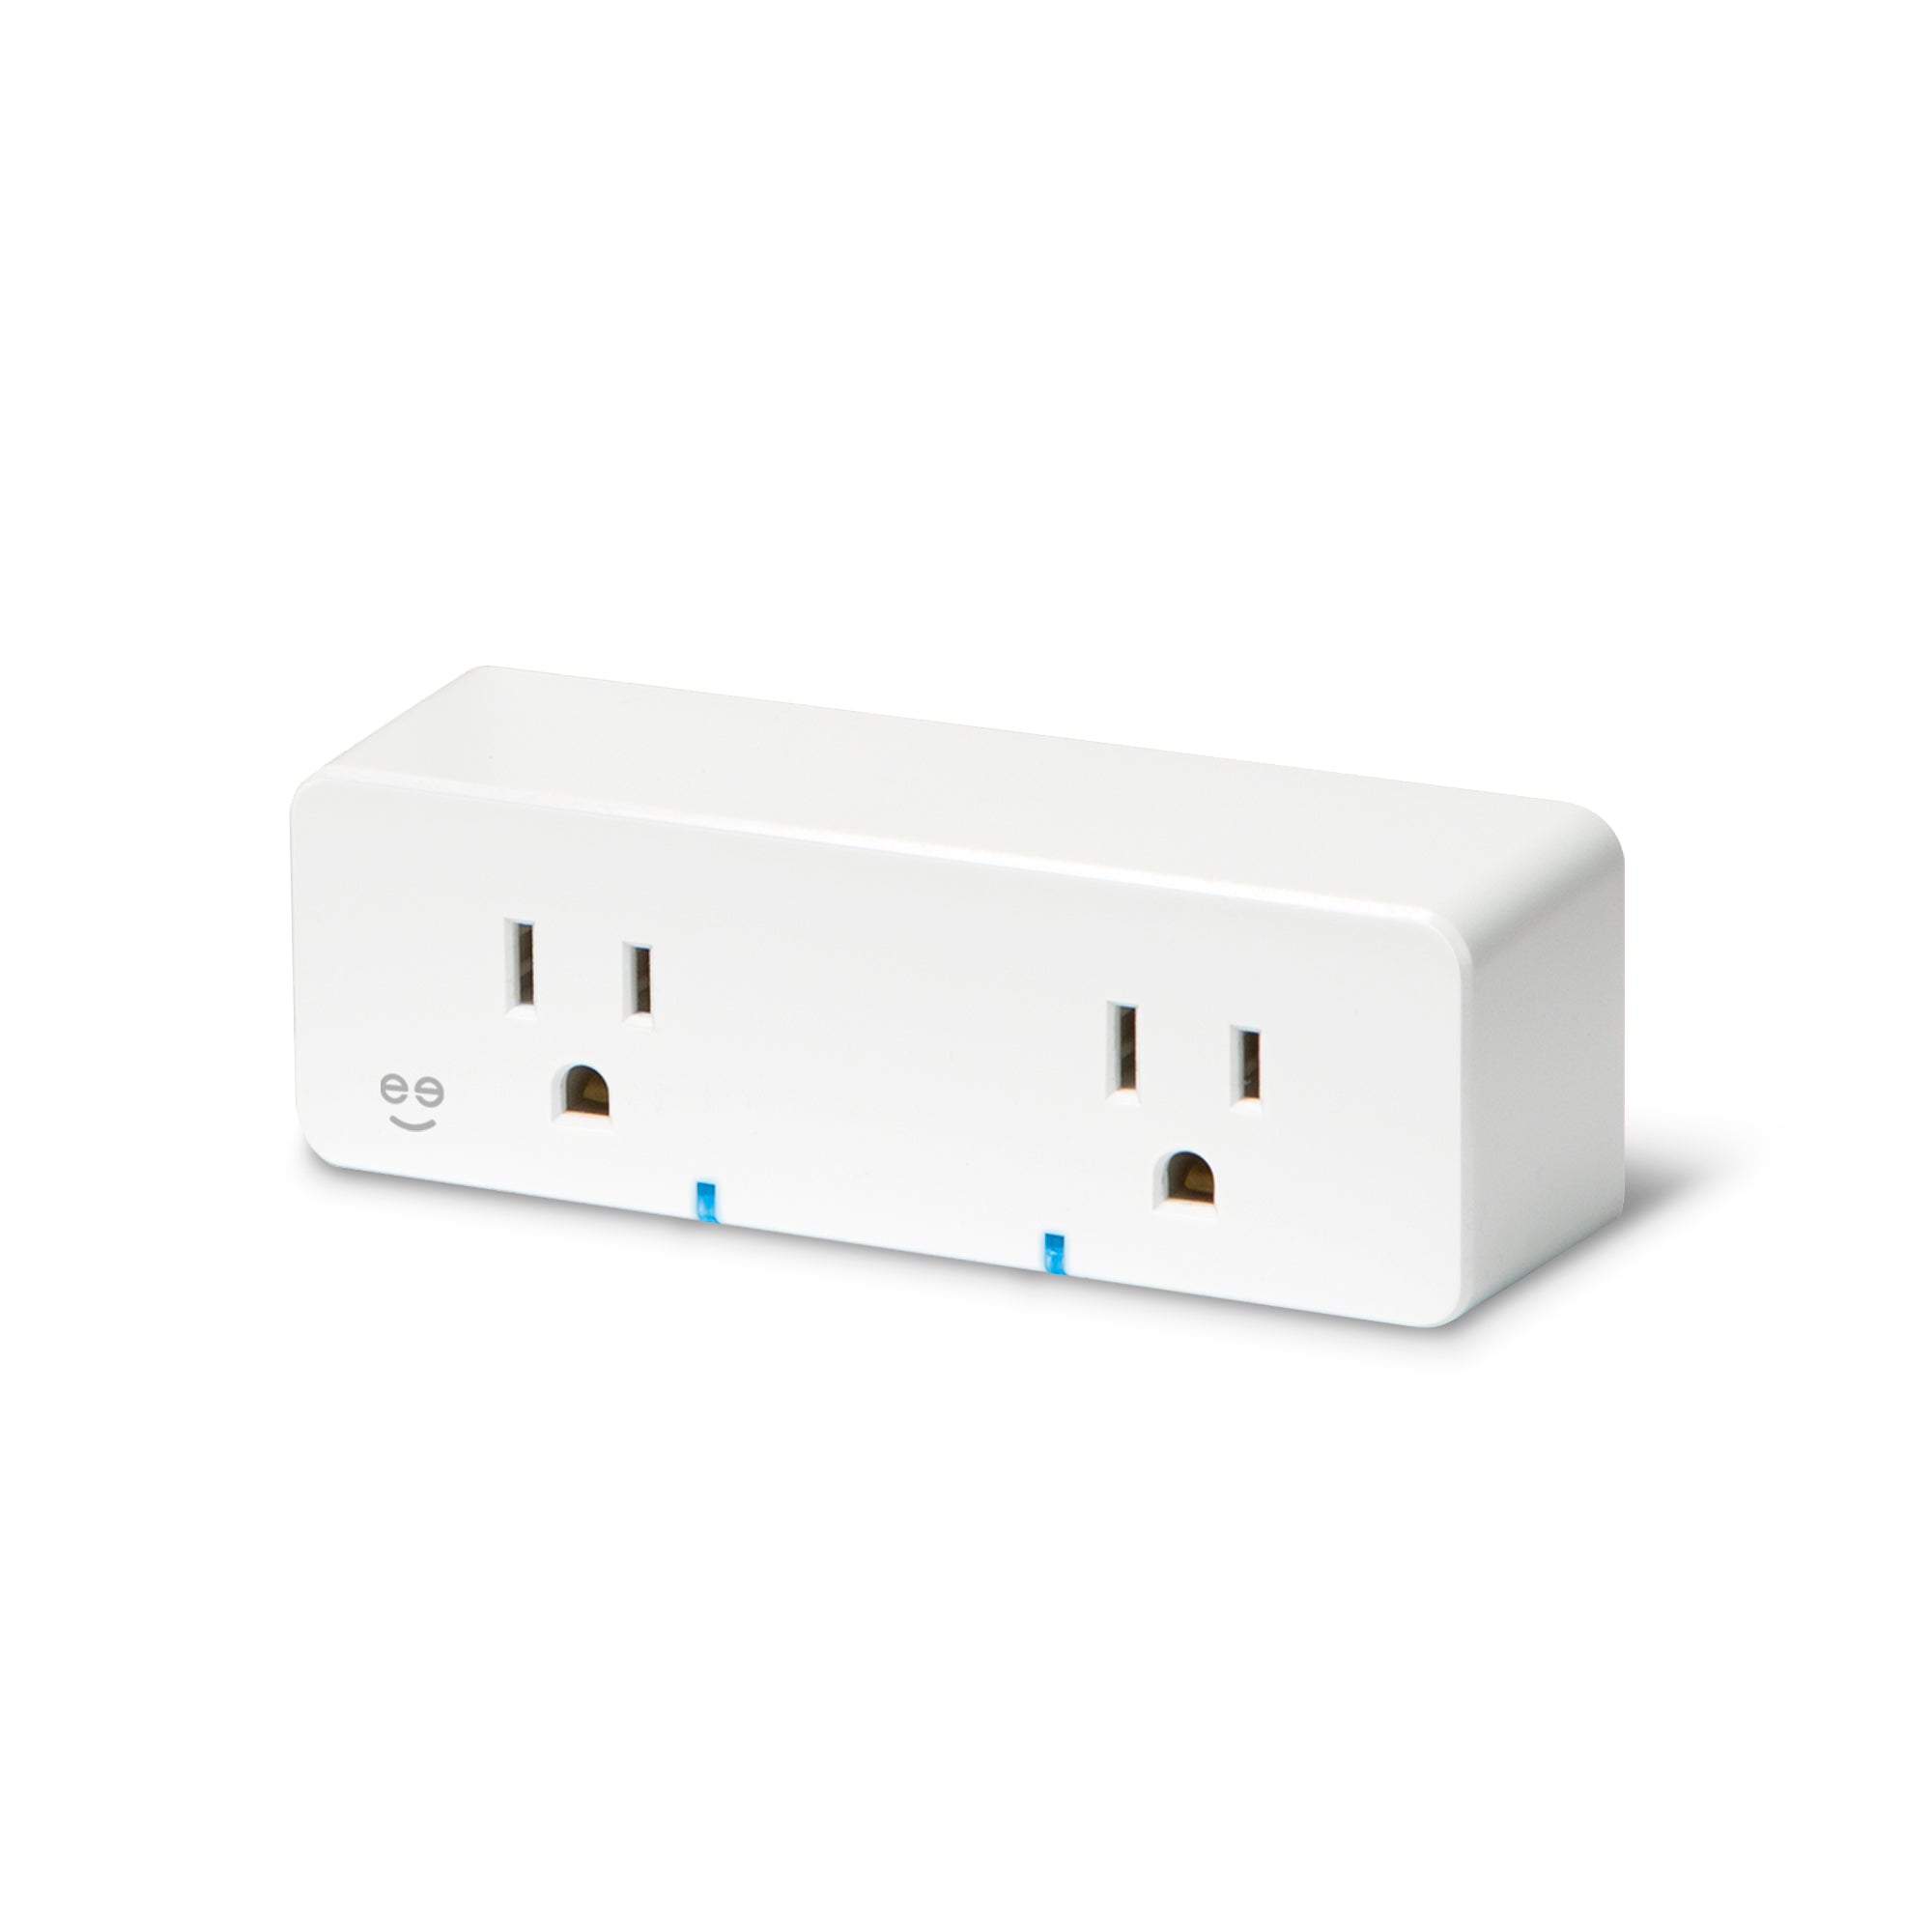 Geeni Switch Duo Double Smart Plug, White - 2 Outlets